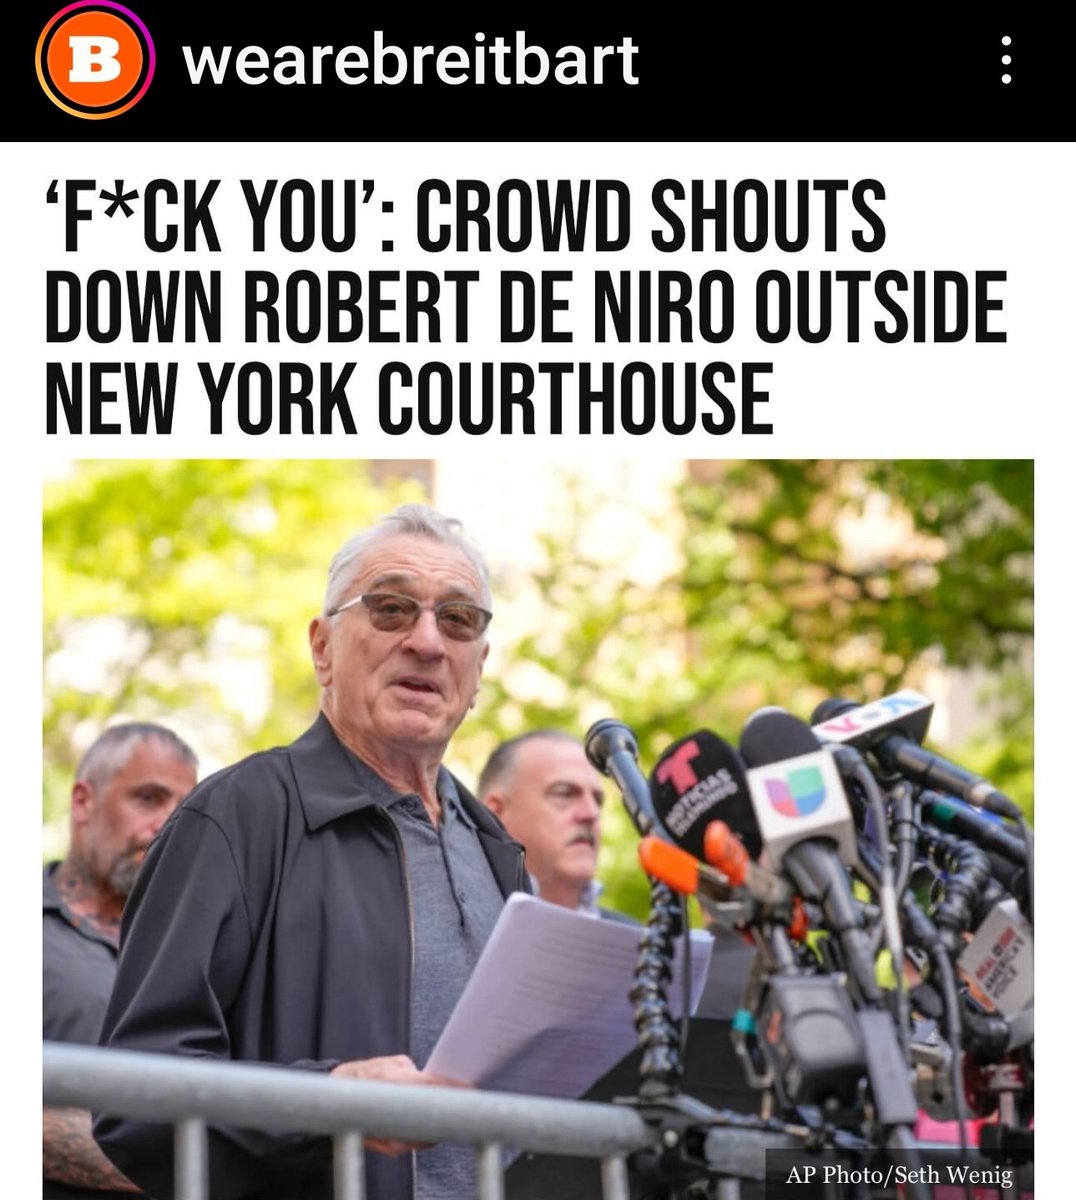 Hear that #robertdeniro NOBODY LIKES YOU. NOBODY AGREES WITH YOU.
NOBODY WILL WATCH YOU IN MOVIES ANYMORE.  YOURE DONE.